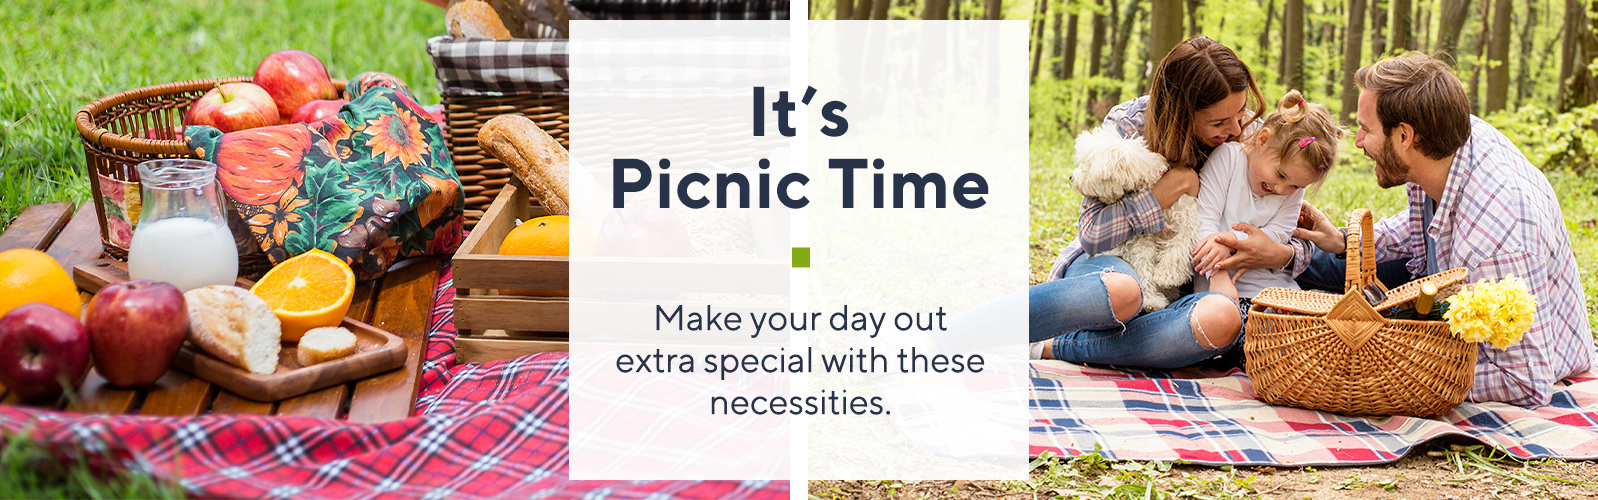 It's Picnic Time  Make your day out extra special with these necessities 